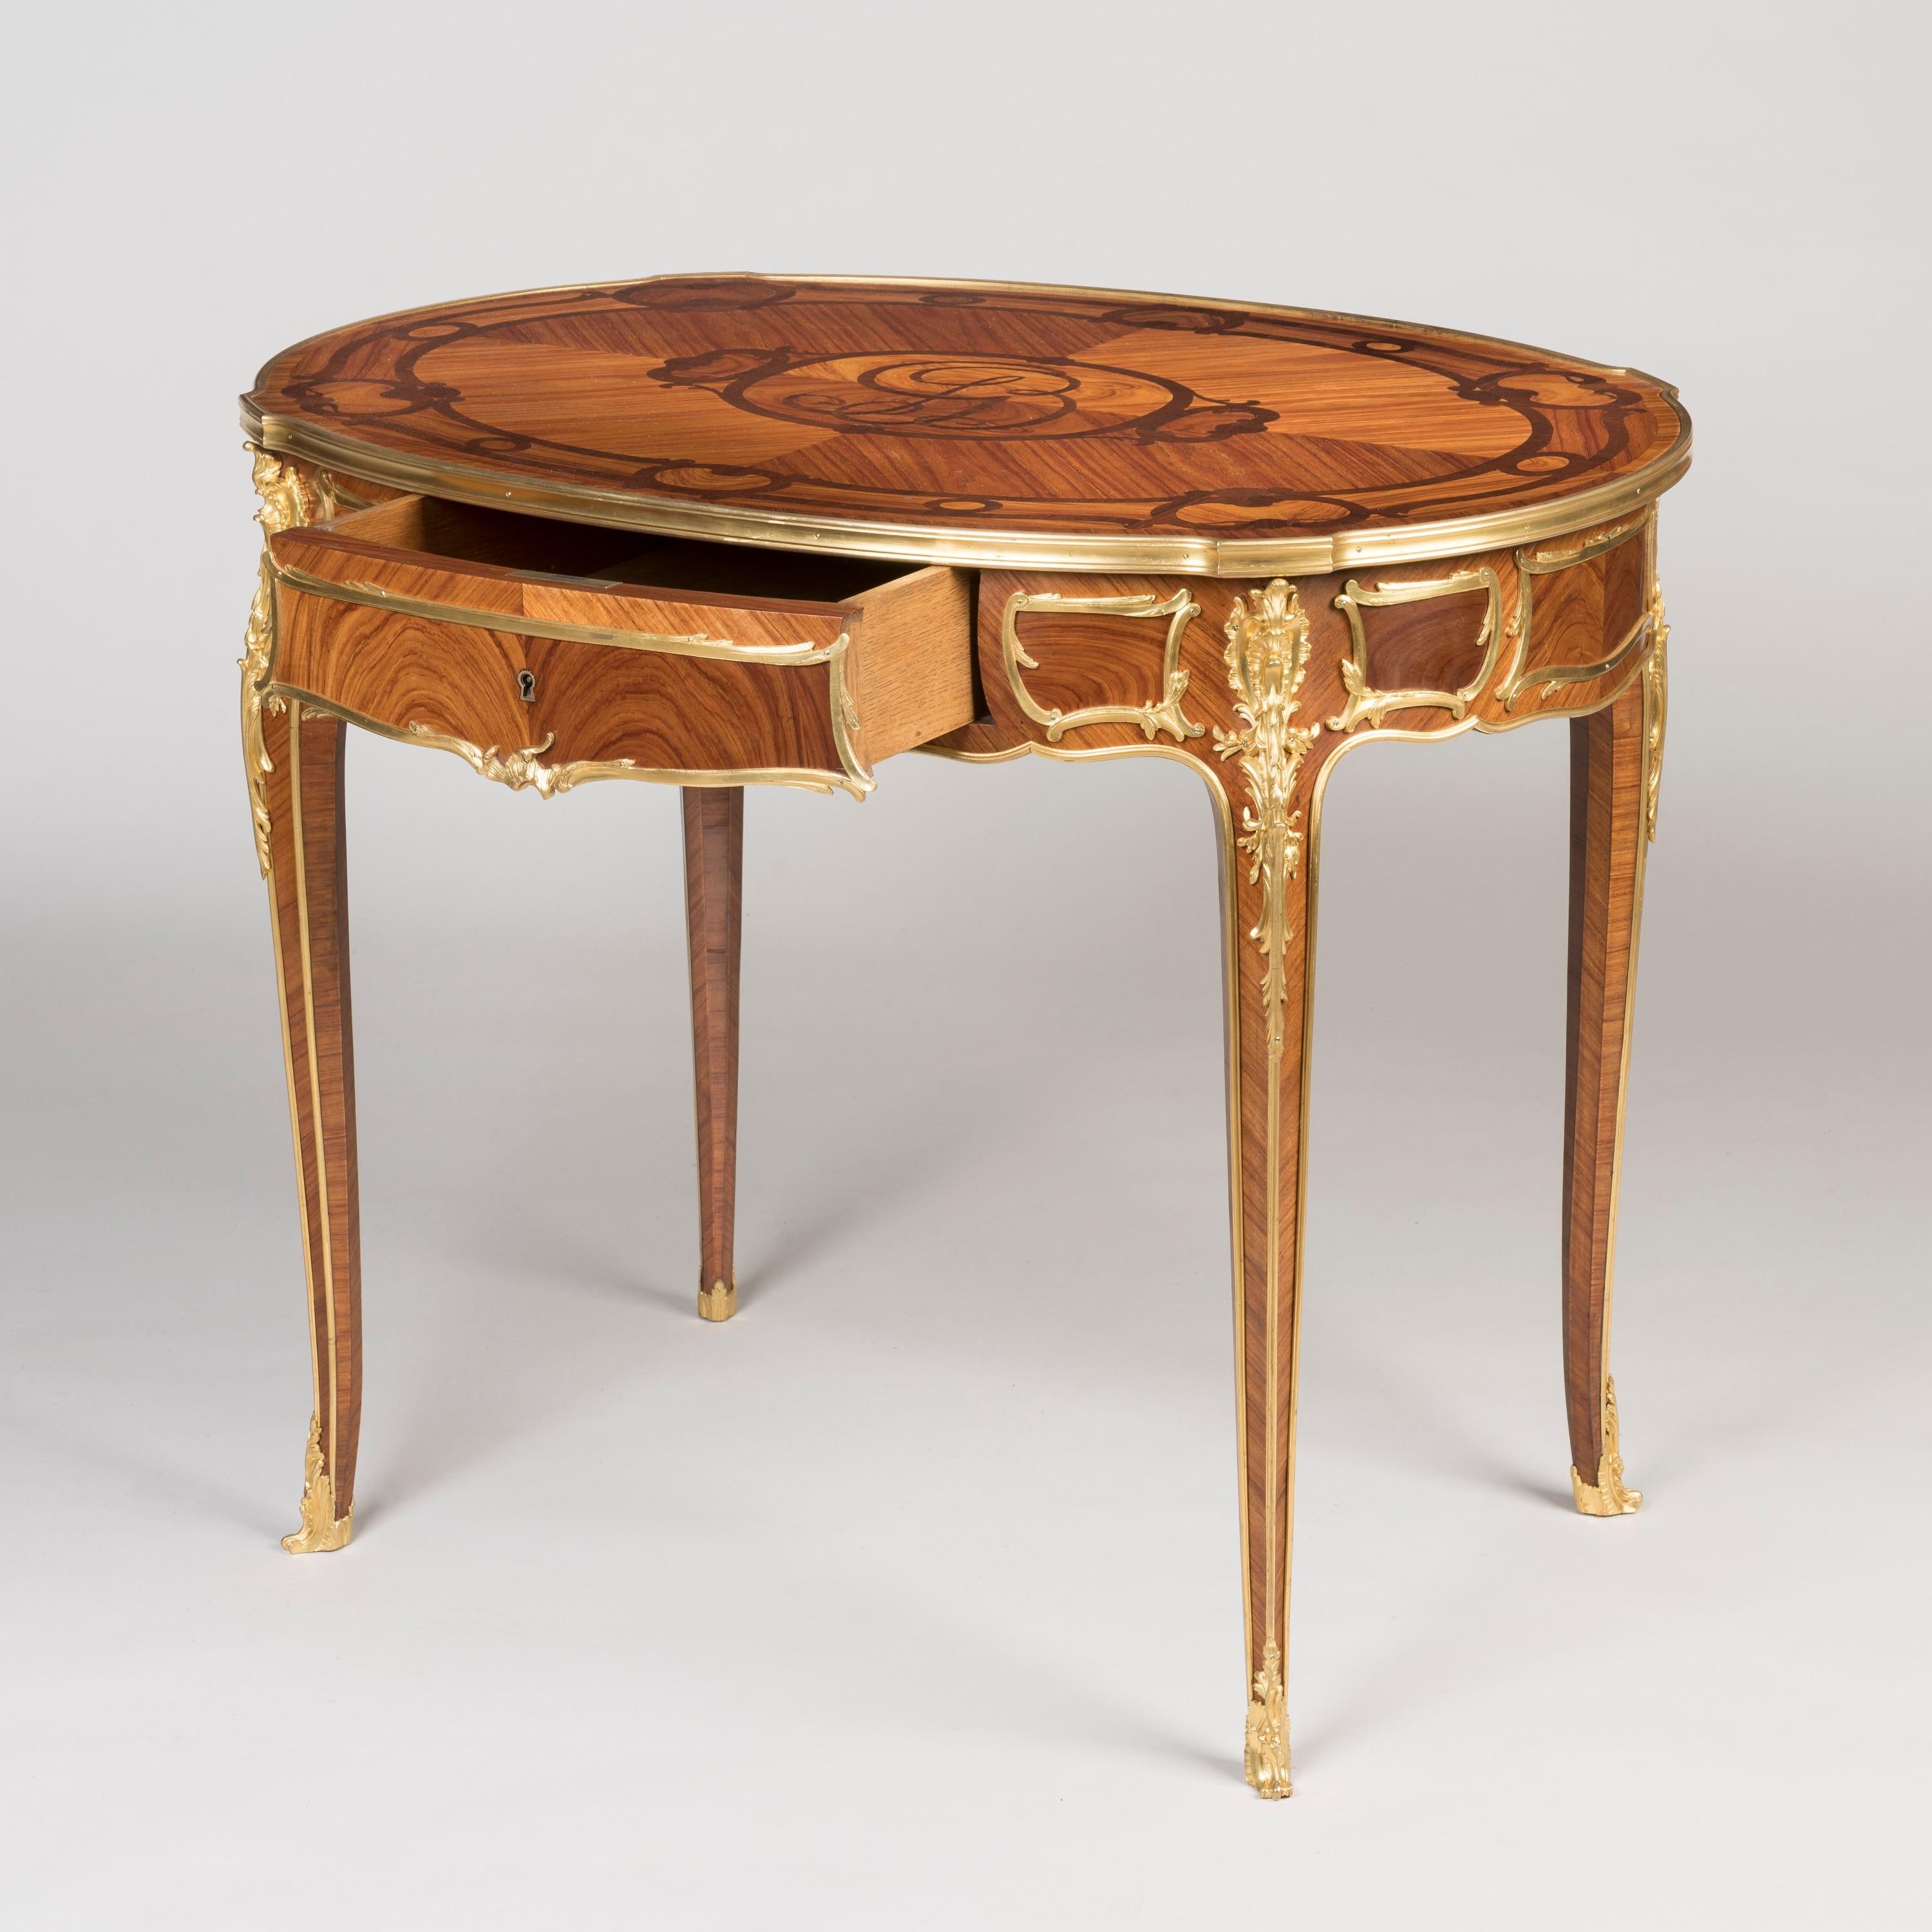 19th Century French Tulipwood Table in the Louis XVI Style For Sale 1